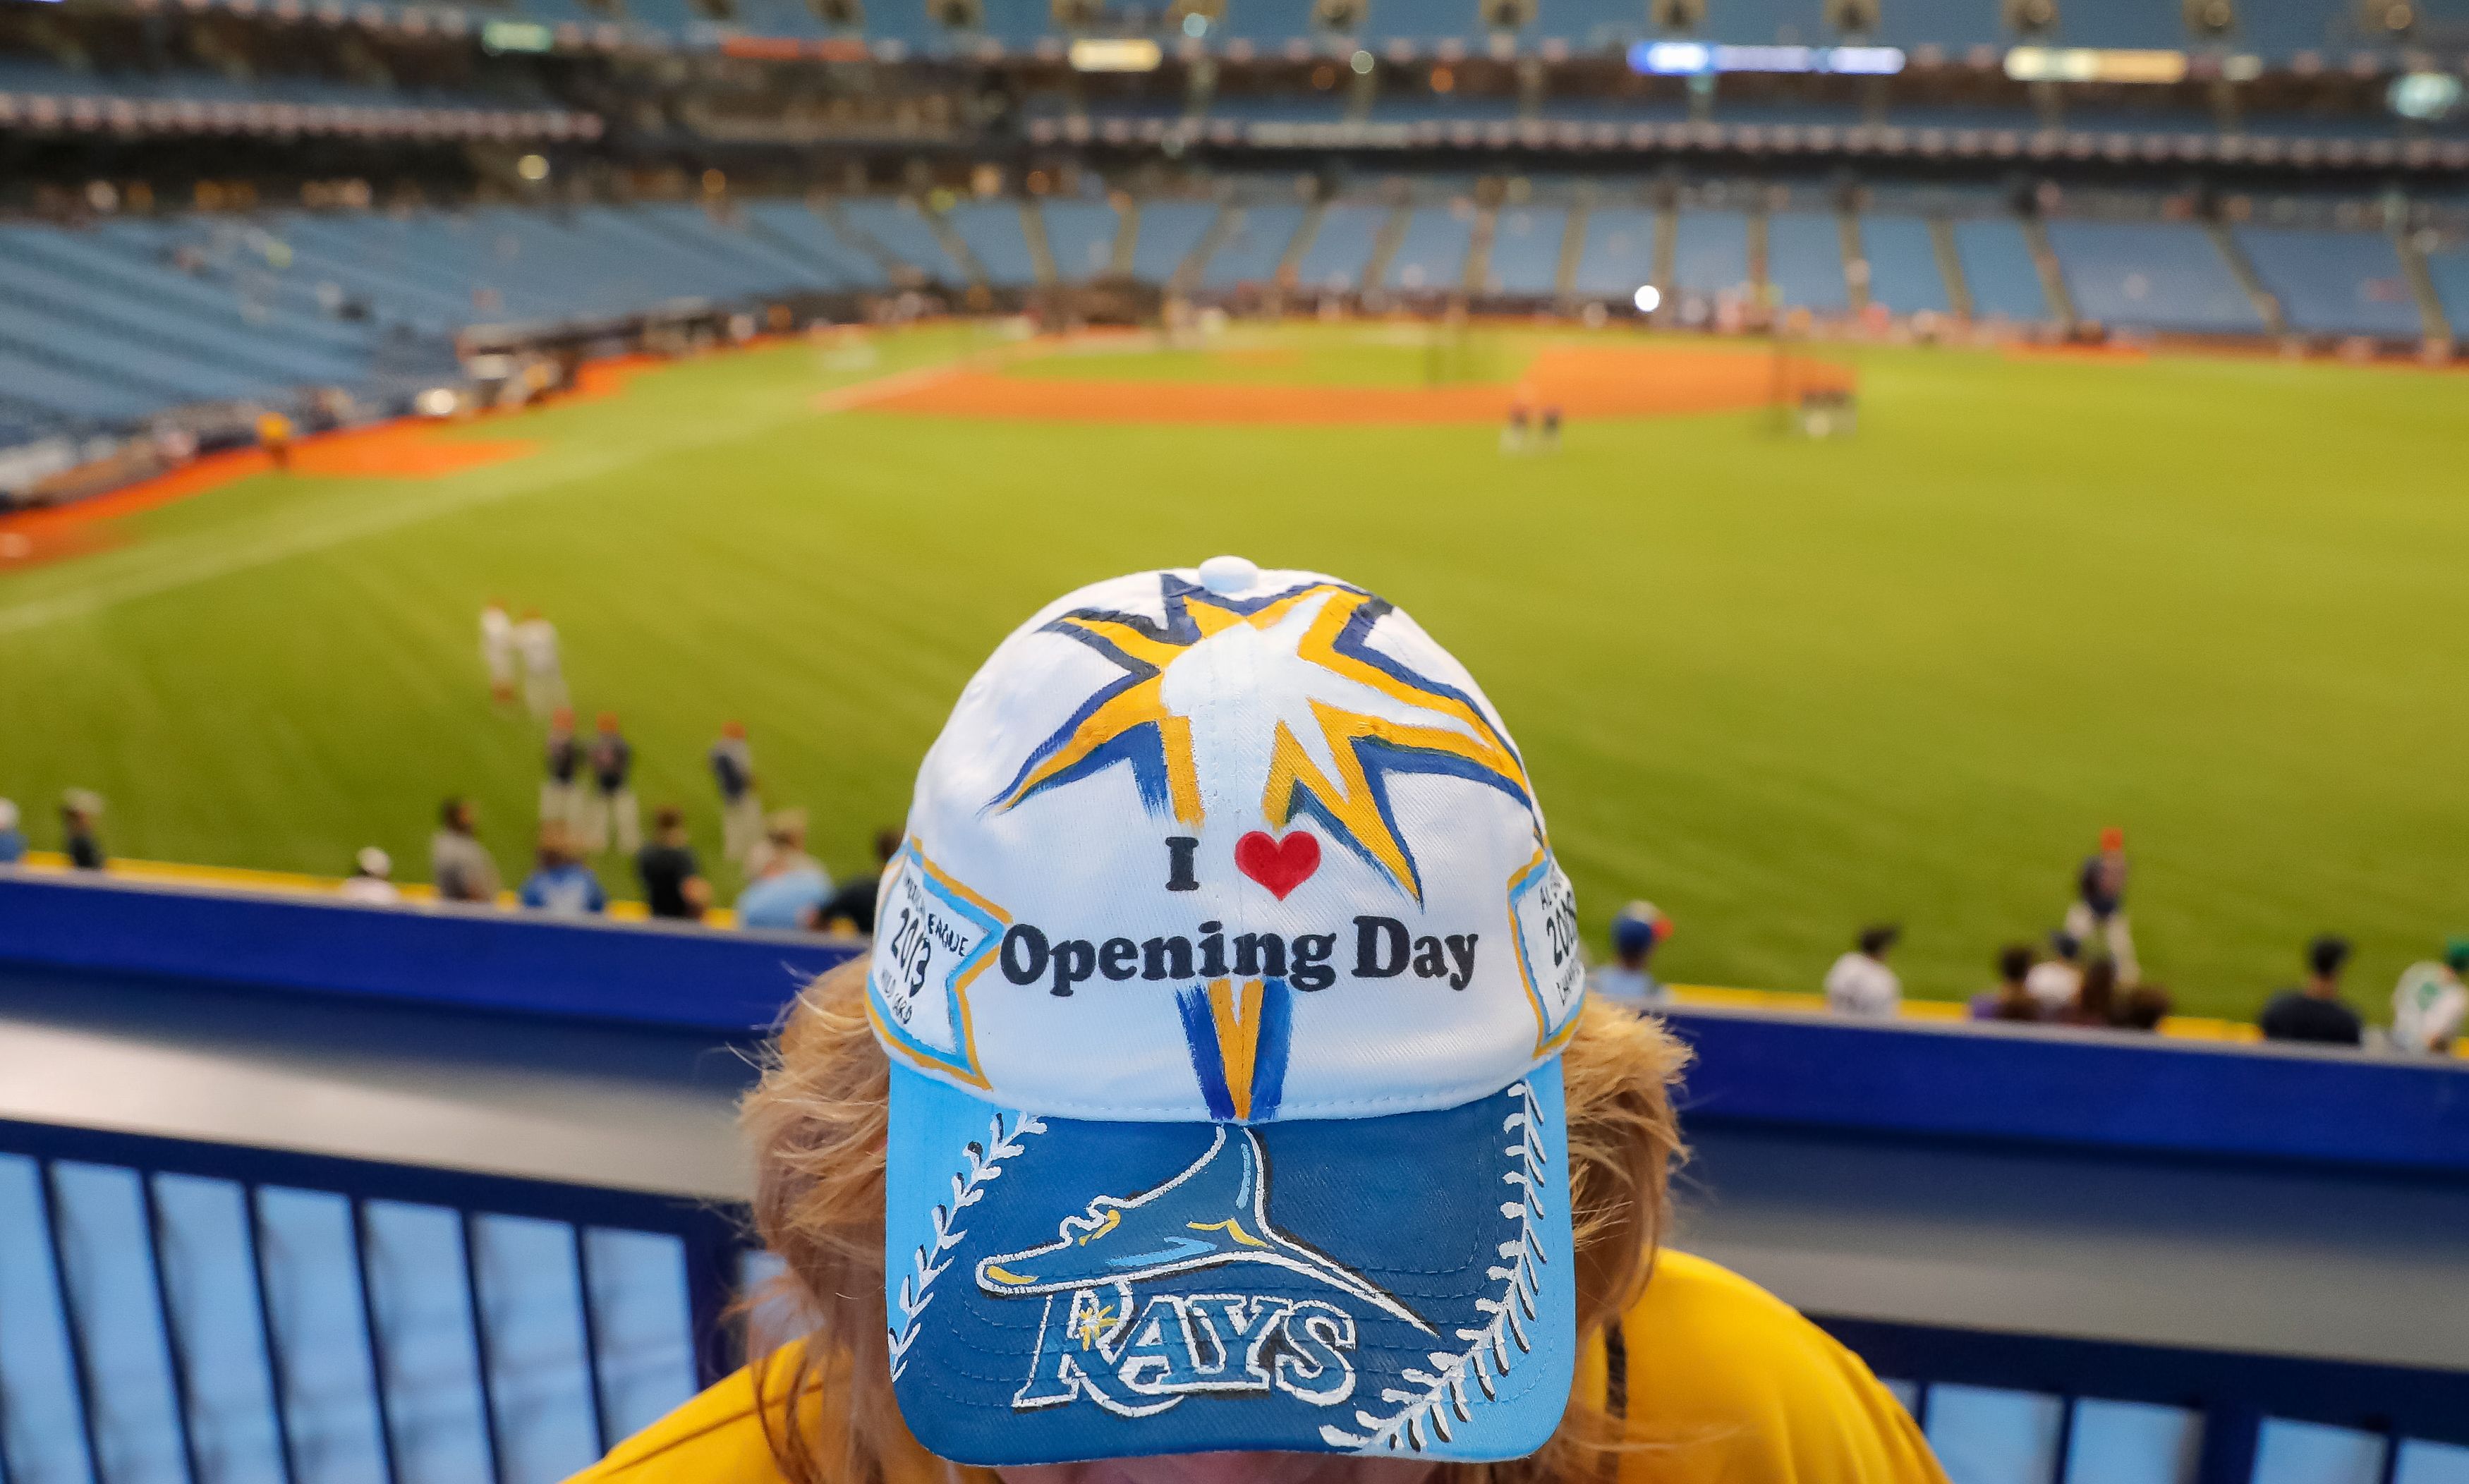 A person standing in front of the field at Rays stadium puts their head down to show their hat that says "I (heart) opening day" with the Rays logo on it